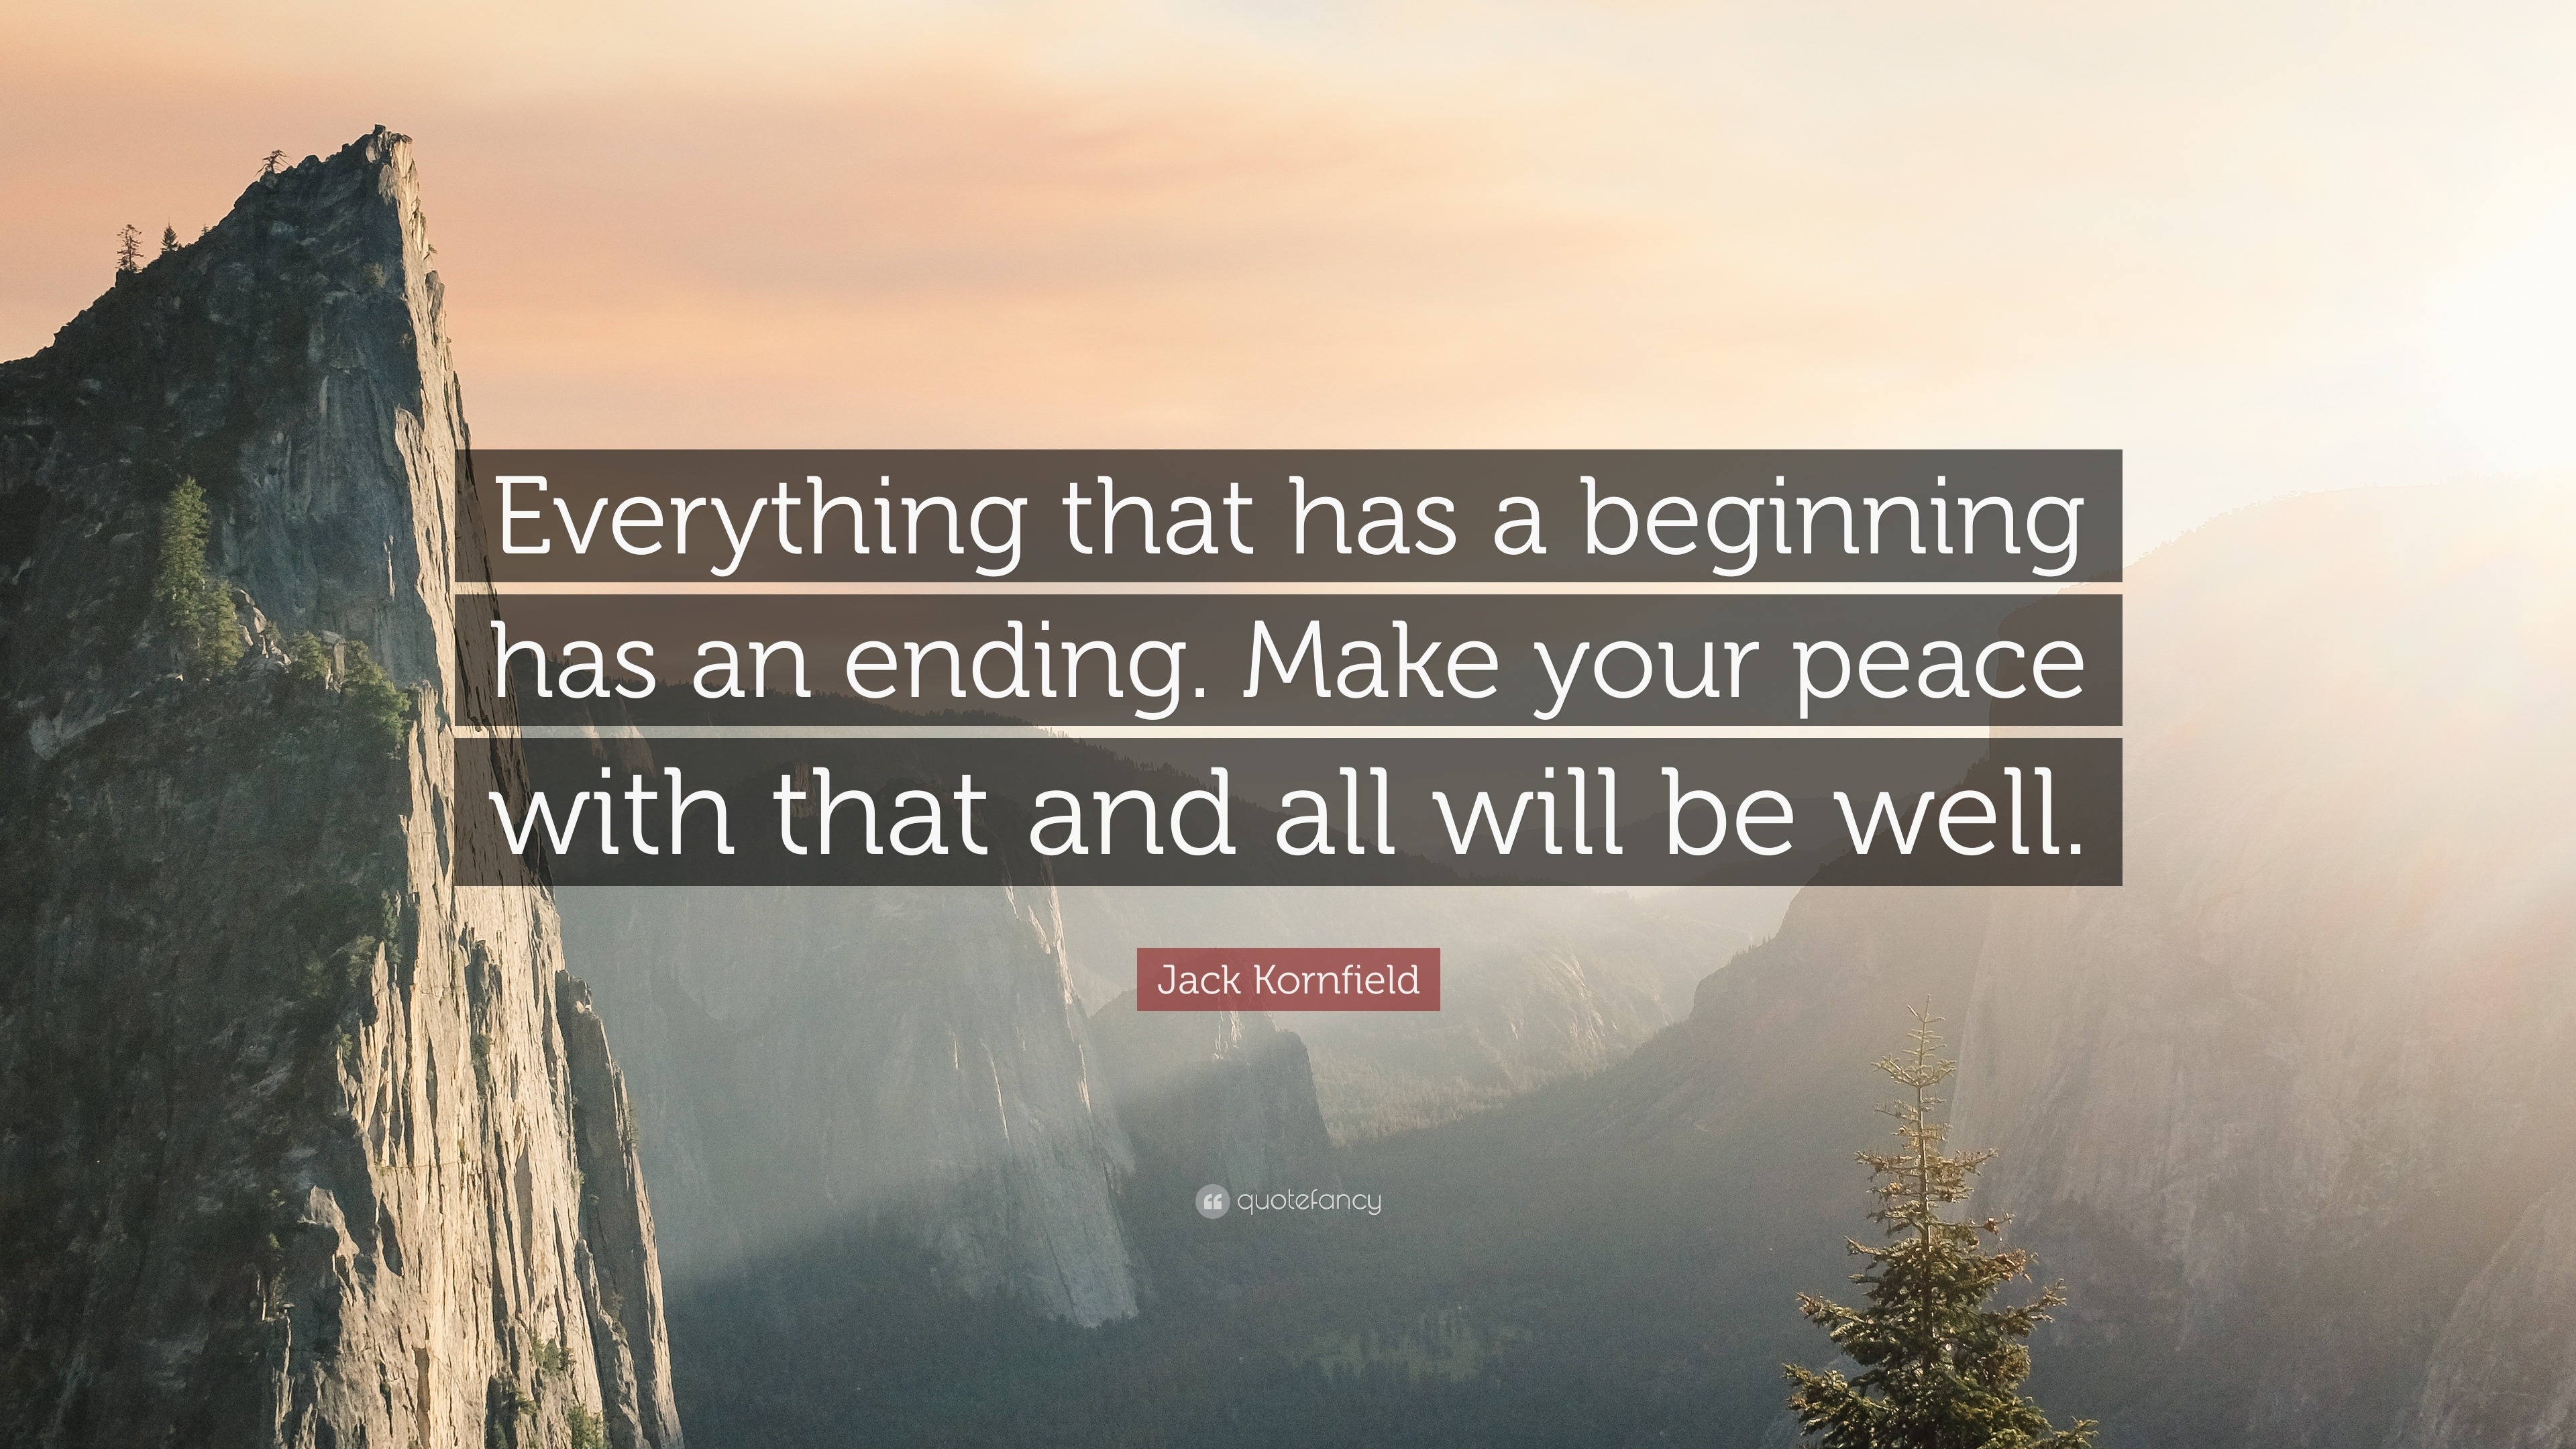 Jack Kornfield Quote: “Everything that has a beginning has an ending ...